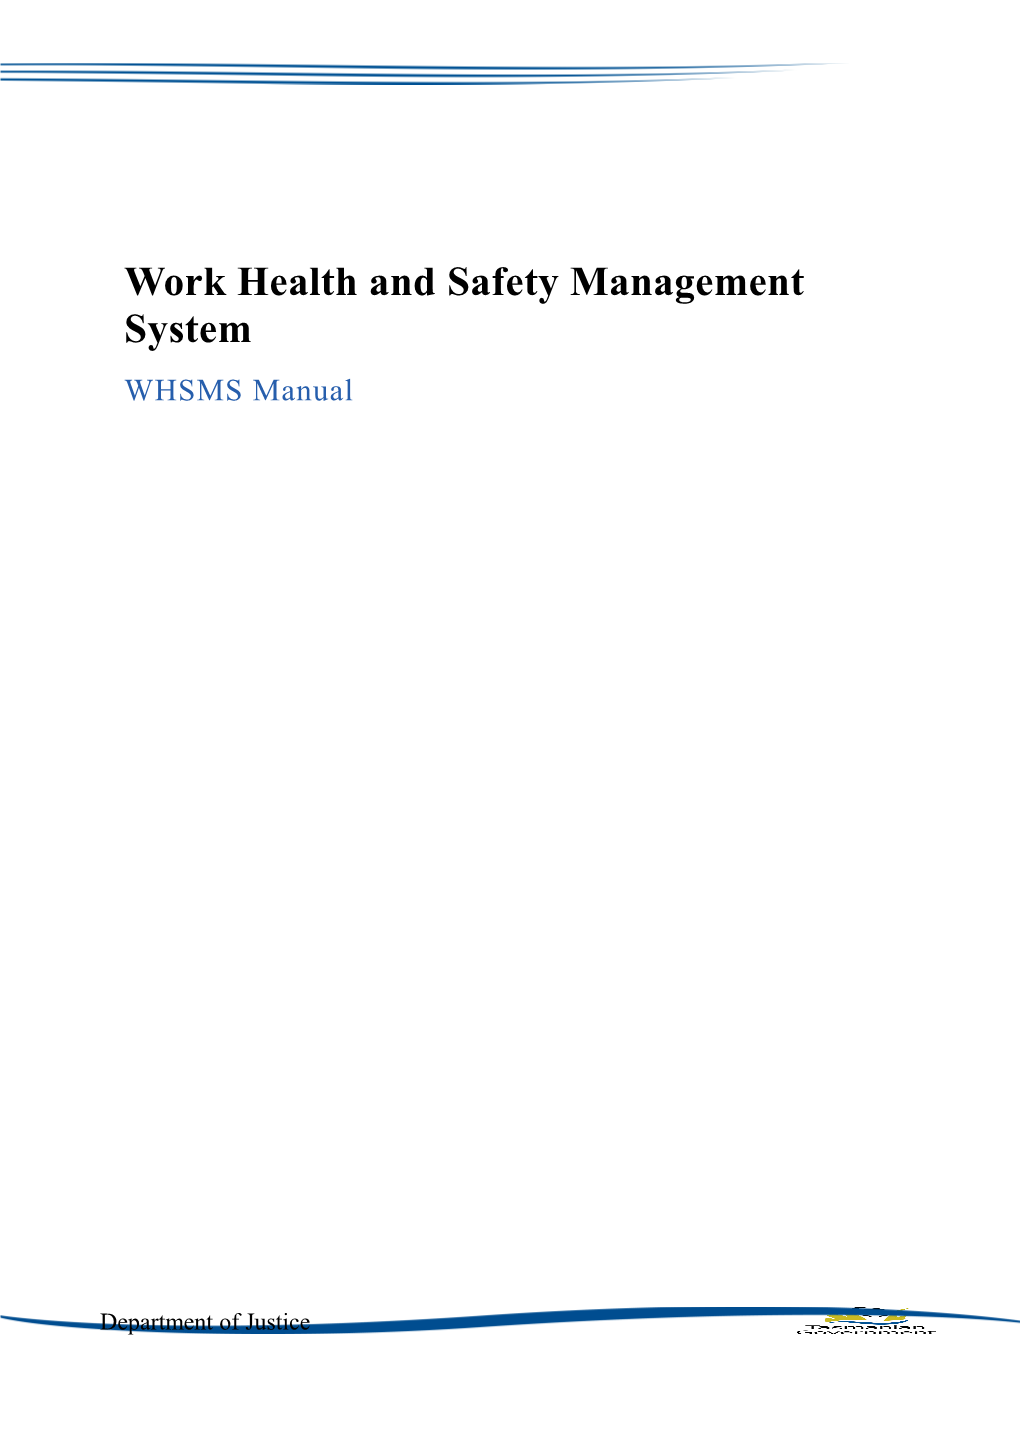 Work Health and Safety Management System Manual